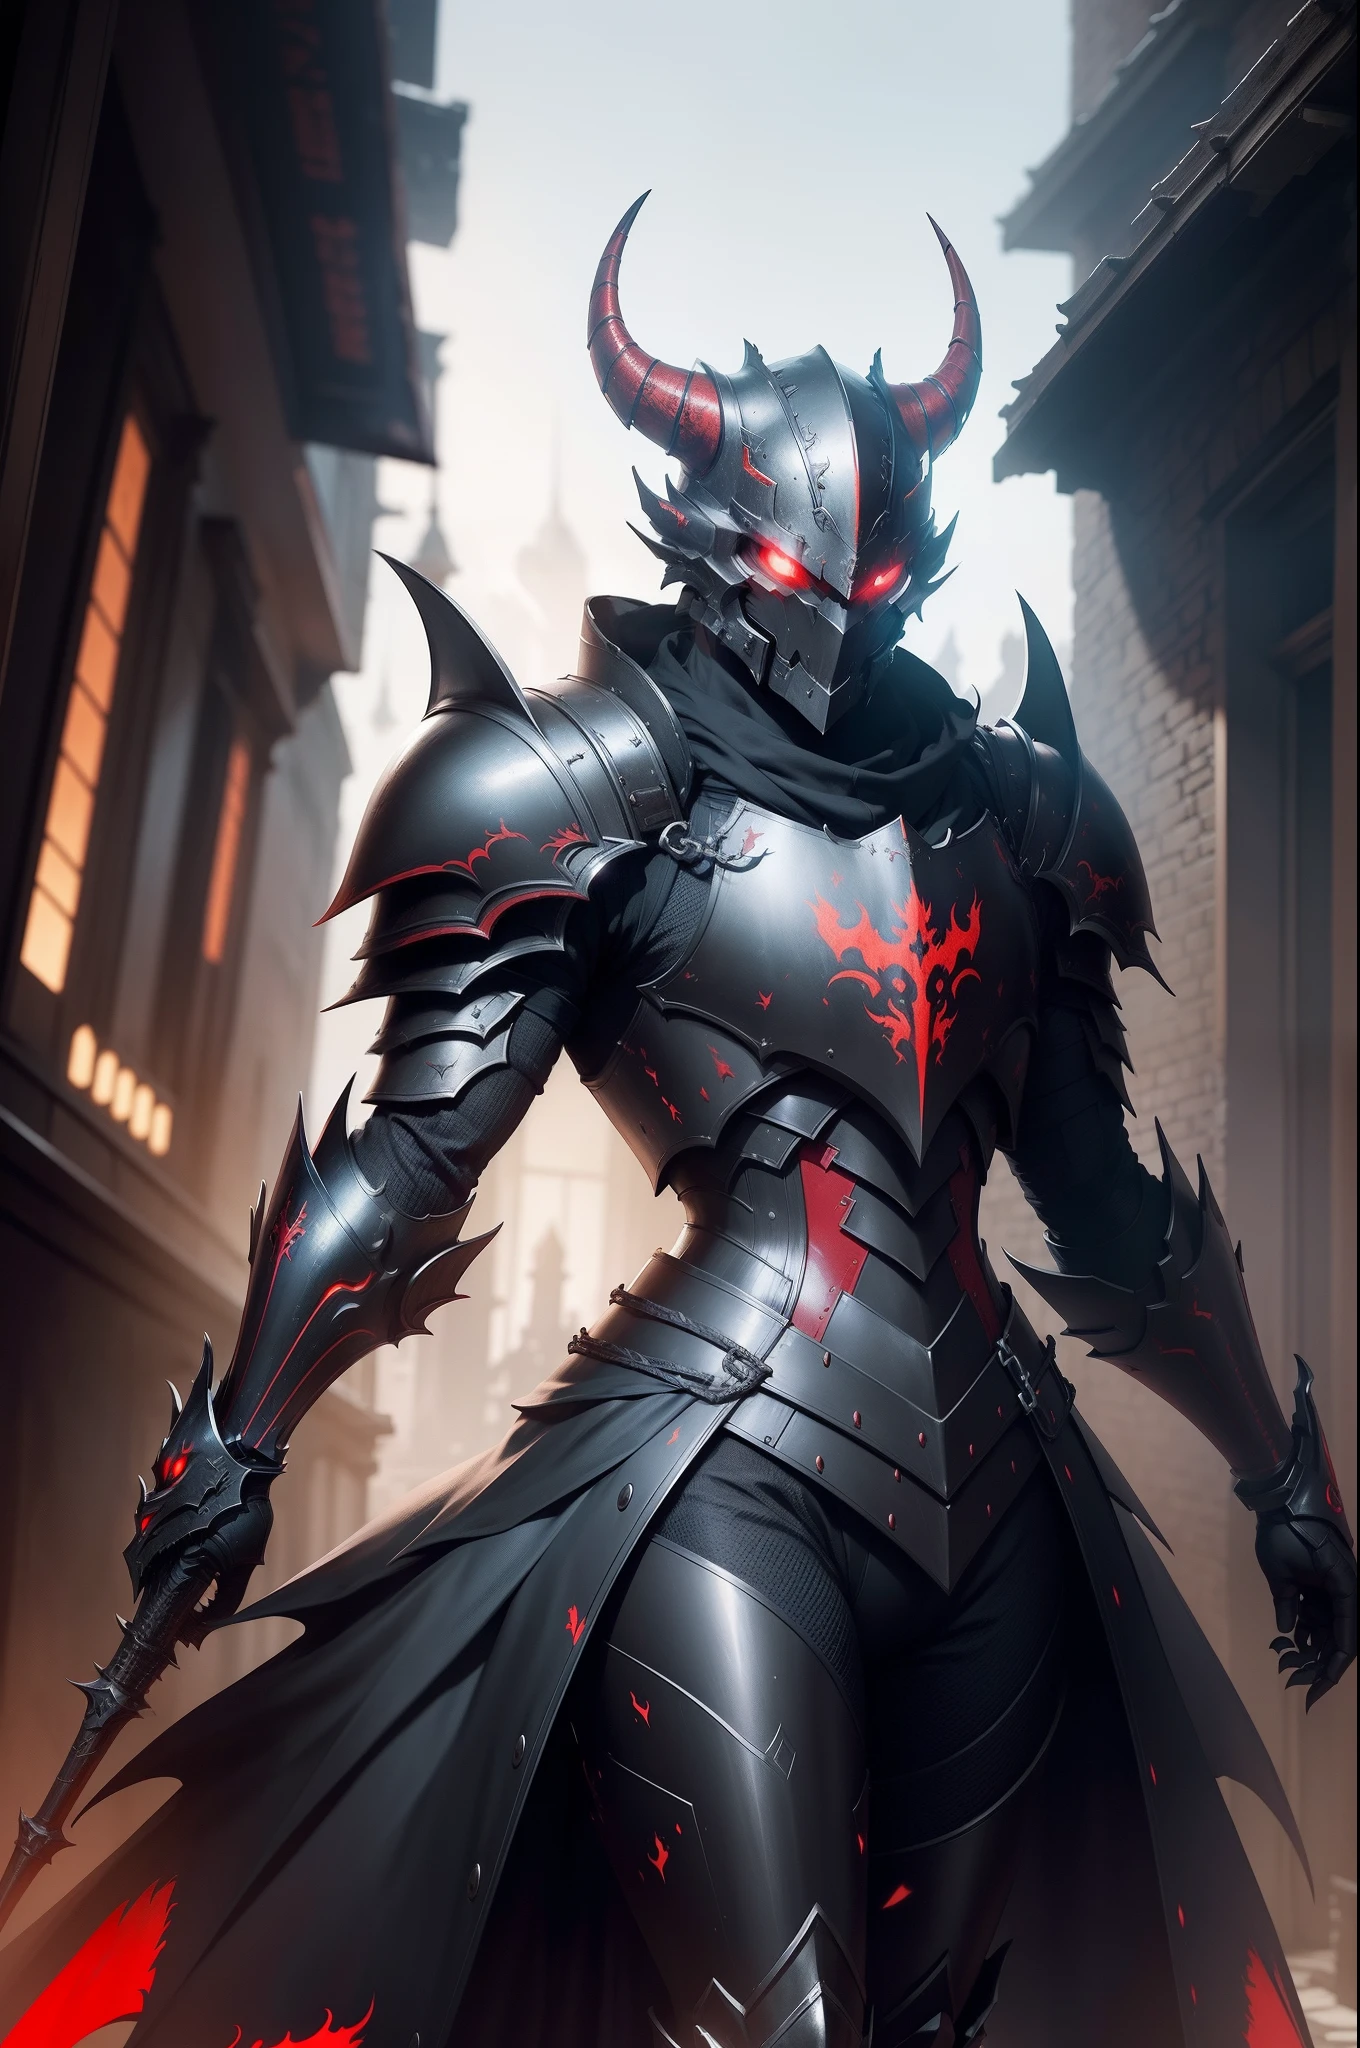 There is a man in a black and red outfit, who poses, kitsune inspired armor, Demonic dragon-inspired armor, Black and red reflected armor, Black and red armor, Dragon inspired suit, Dragon-inspired armor, Male Robot Anthro Dragon, Wearing techwear and armor, draconian-looking armor, Wojtek FUS, Fantasy-inspired dragon armor, Im Trend in CGsociety